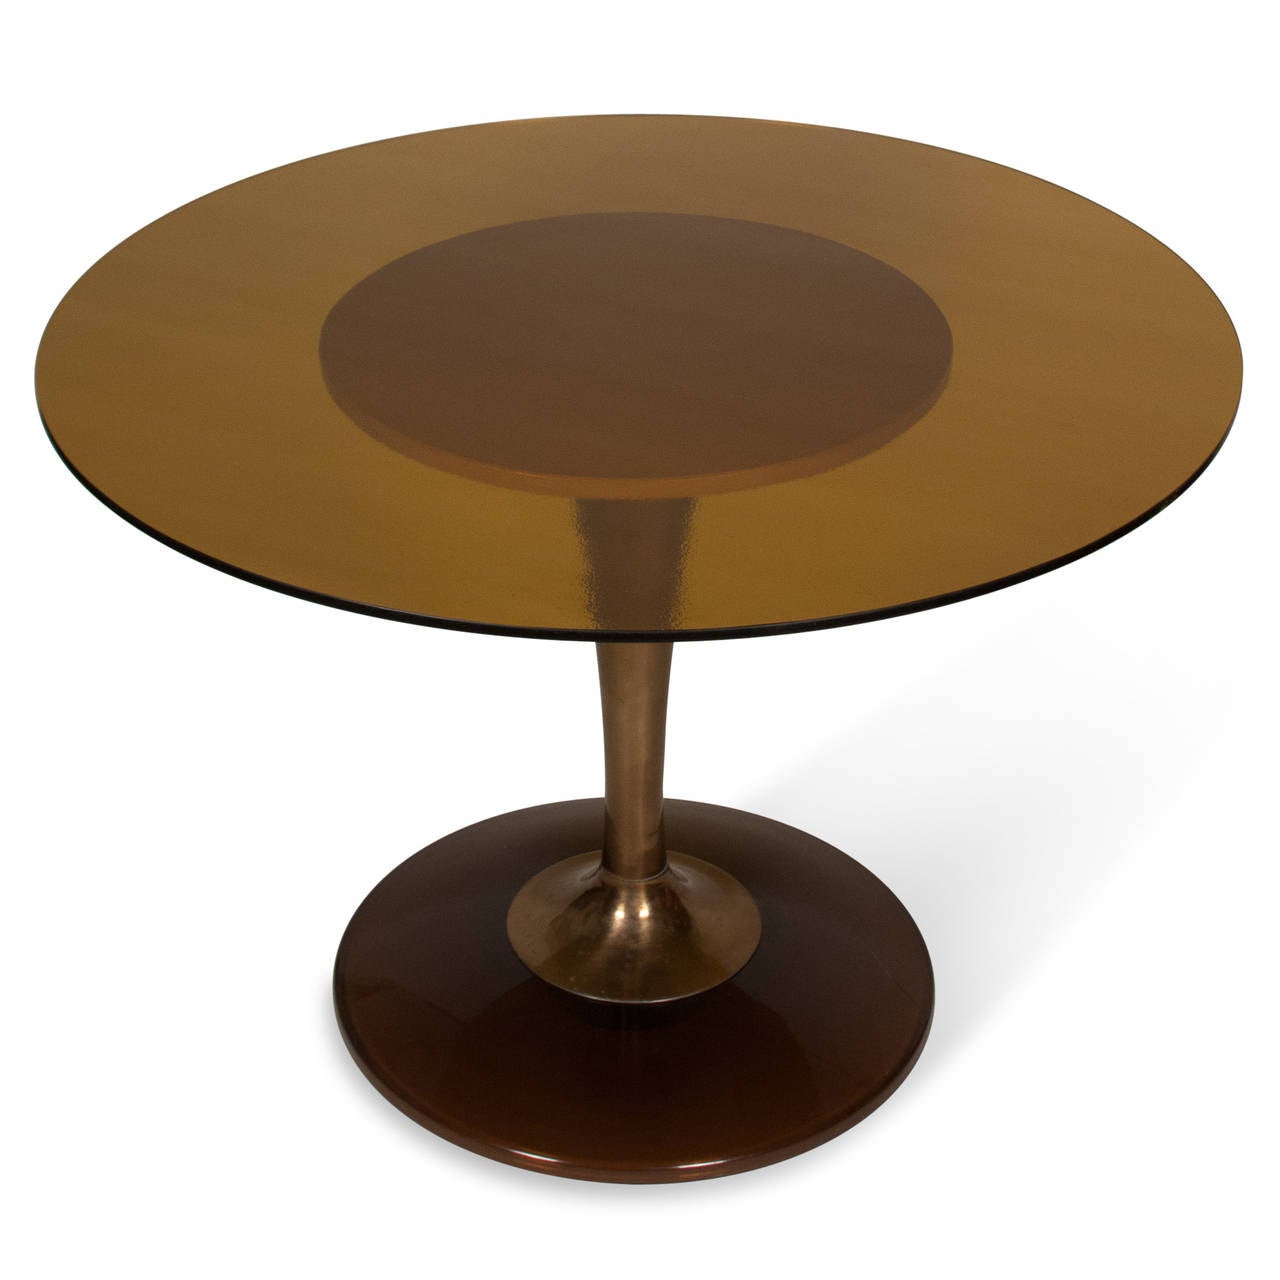 Late 20th Century Amber Glass-Top Tulip Dining Table and Chairs For Sale